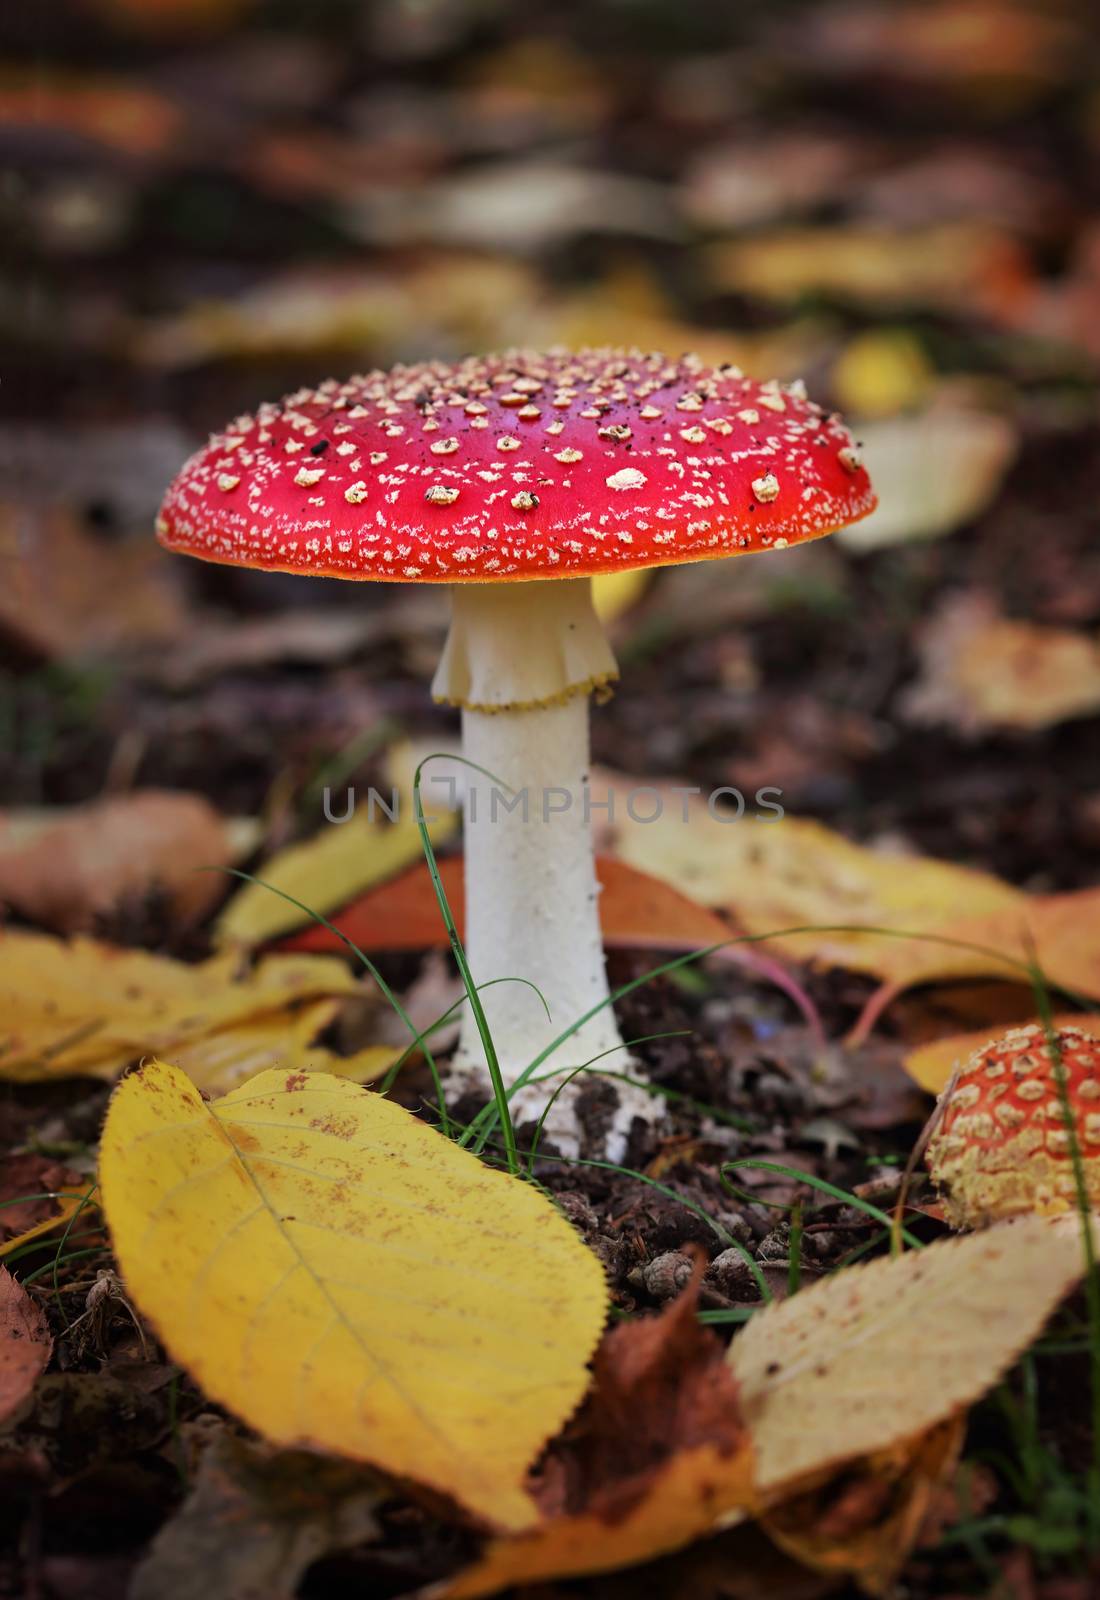 Amanita muscaria or Fly Agaric  toadstool by lovleah